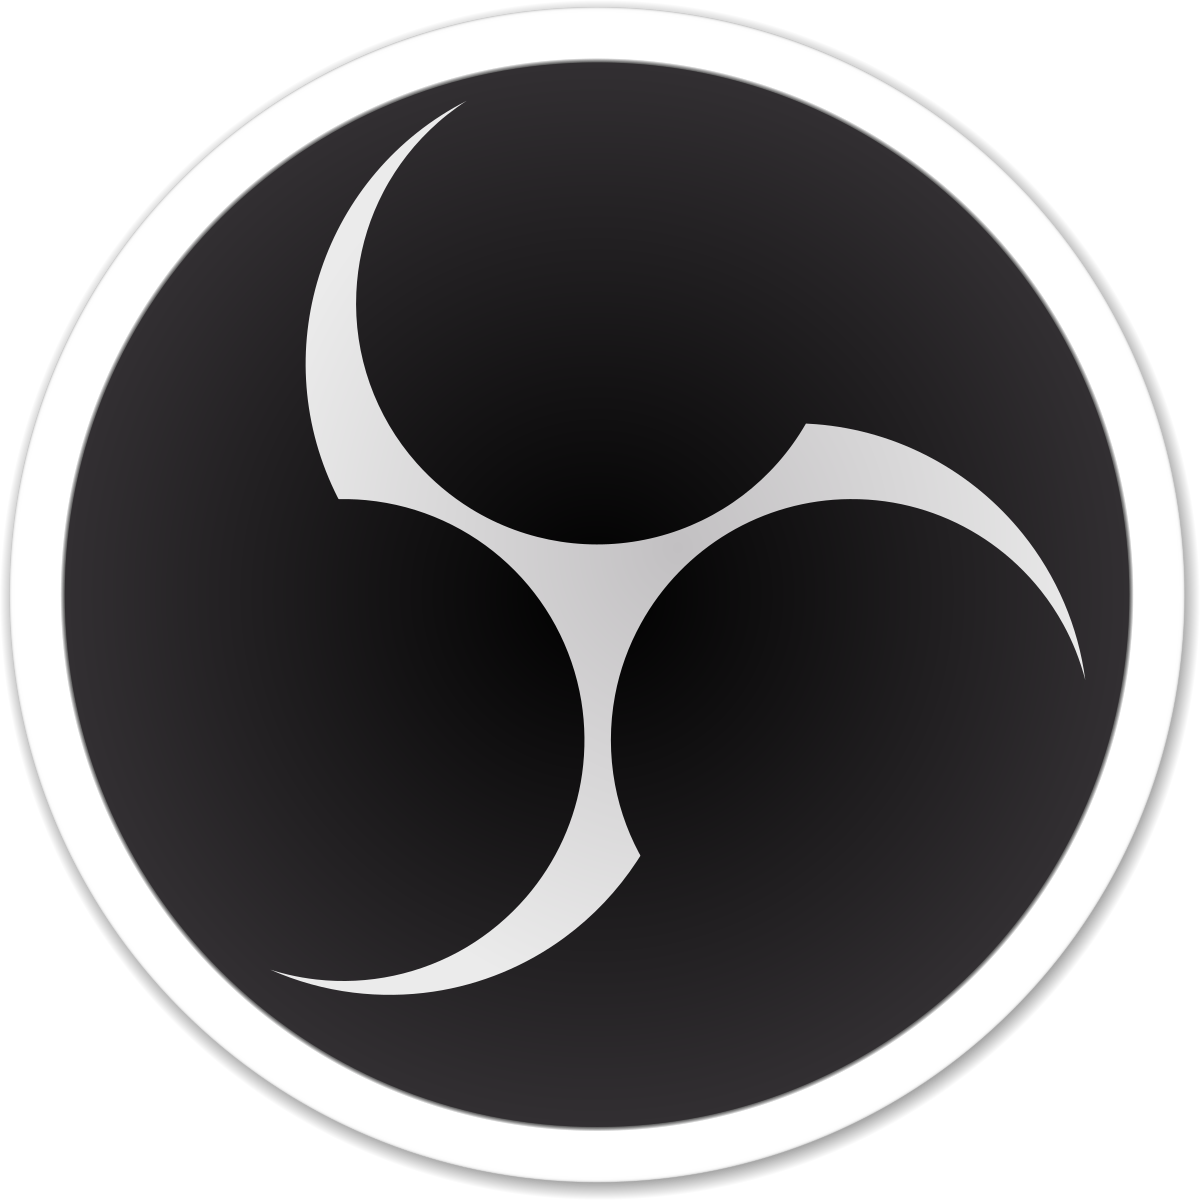 Open Broadcaster Software - Wikipedia